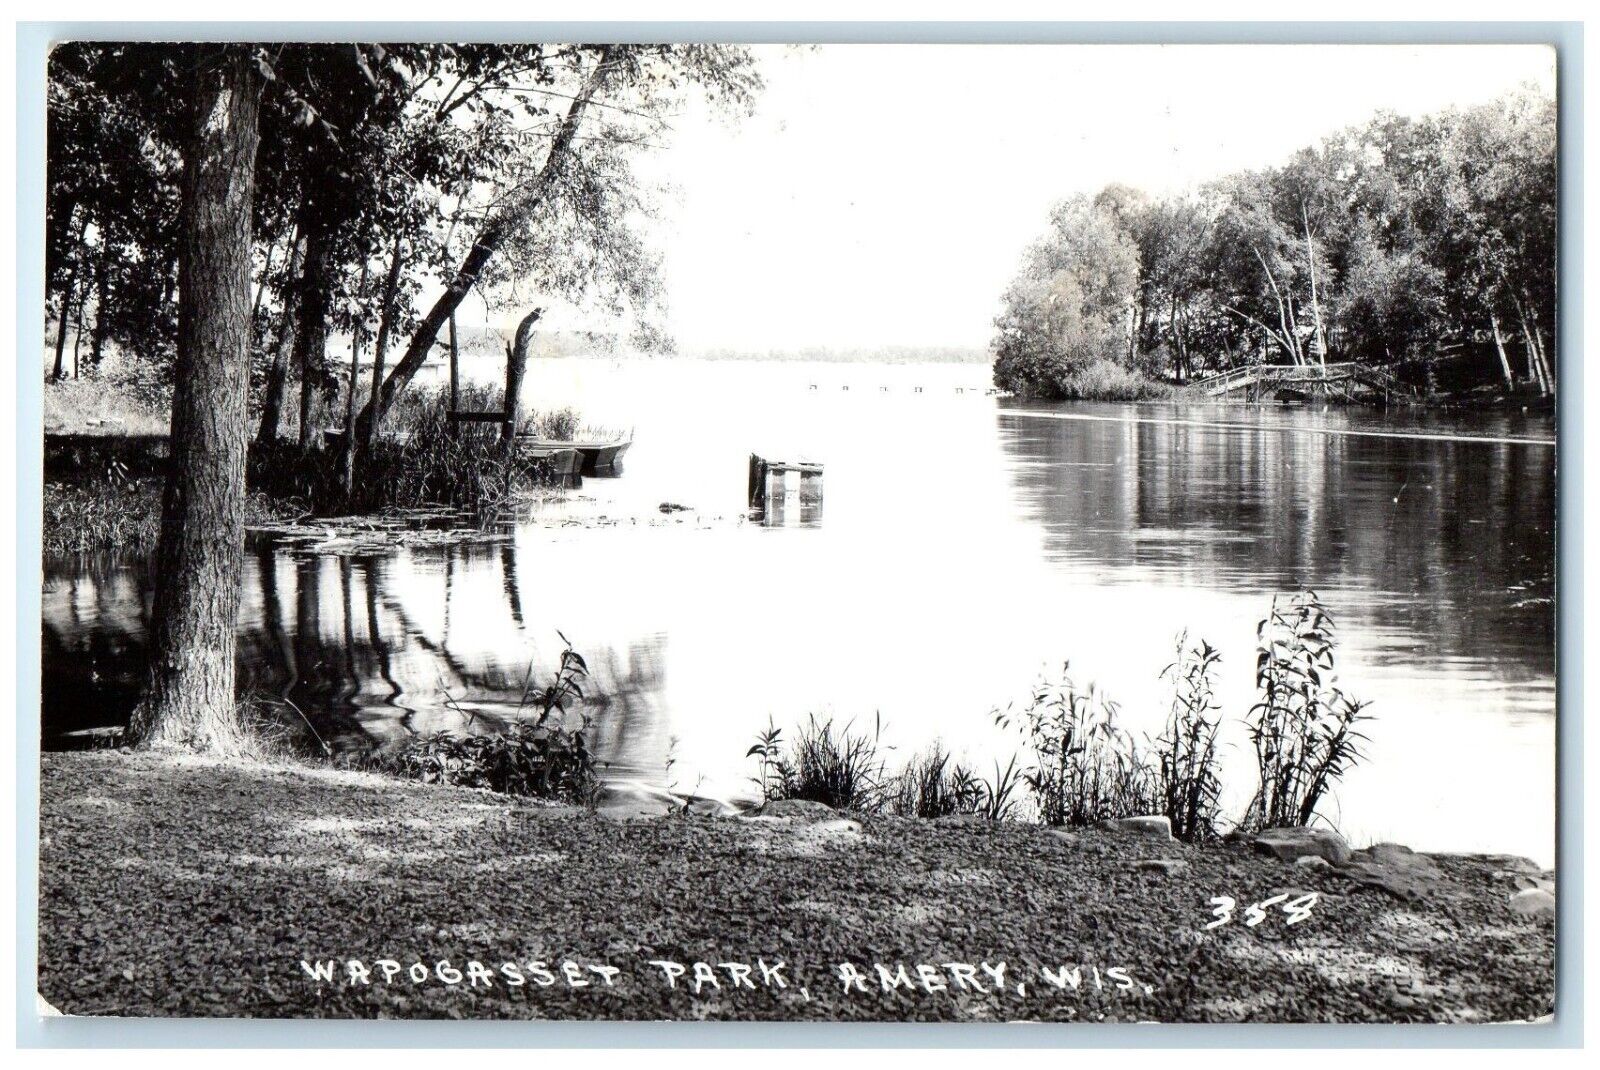 c1940's View Of Wapogasset Park Boats Amery Wisconsin WI RPPC Photo Postcard